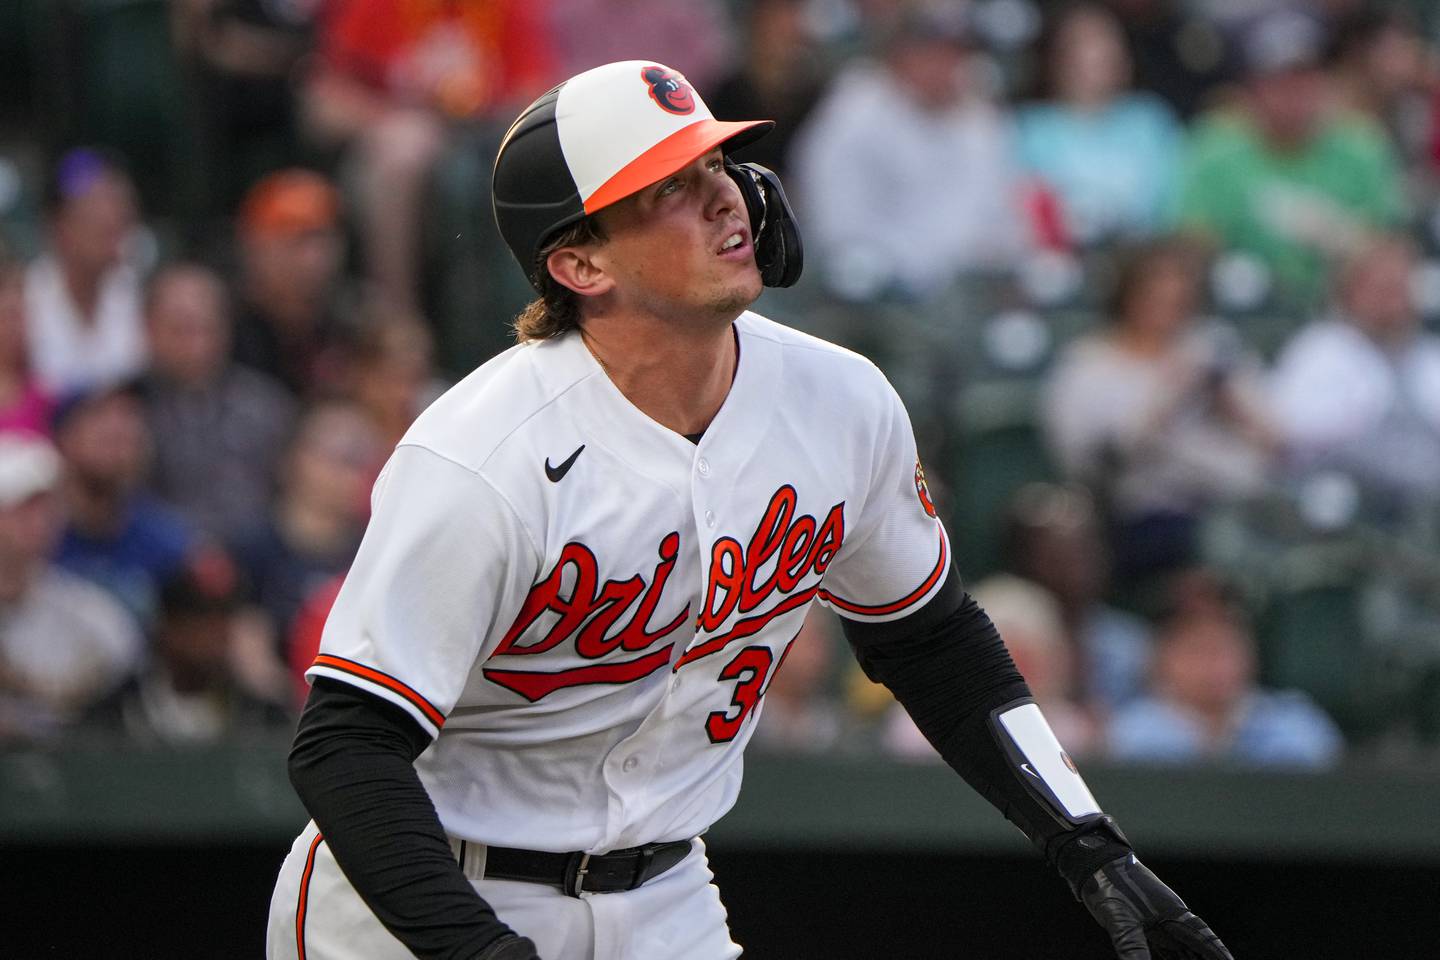 Baltimore Orioles catcher Adley Rutschman (35) looks up at the ball after singling in a baseball game against the Oakland Athletics at Camden Yards on Tuesday, April 11. The Orioles beat the Athletics, 12-8, in the second game of the series.